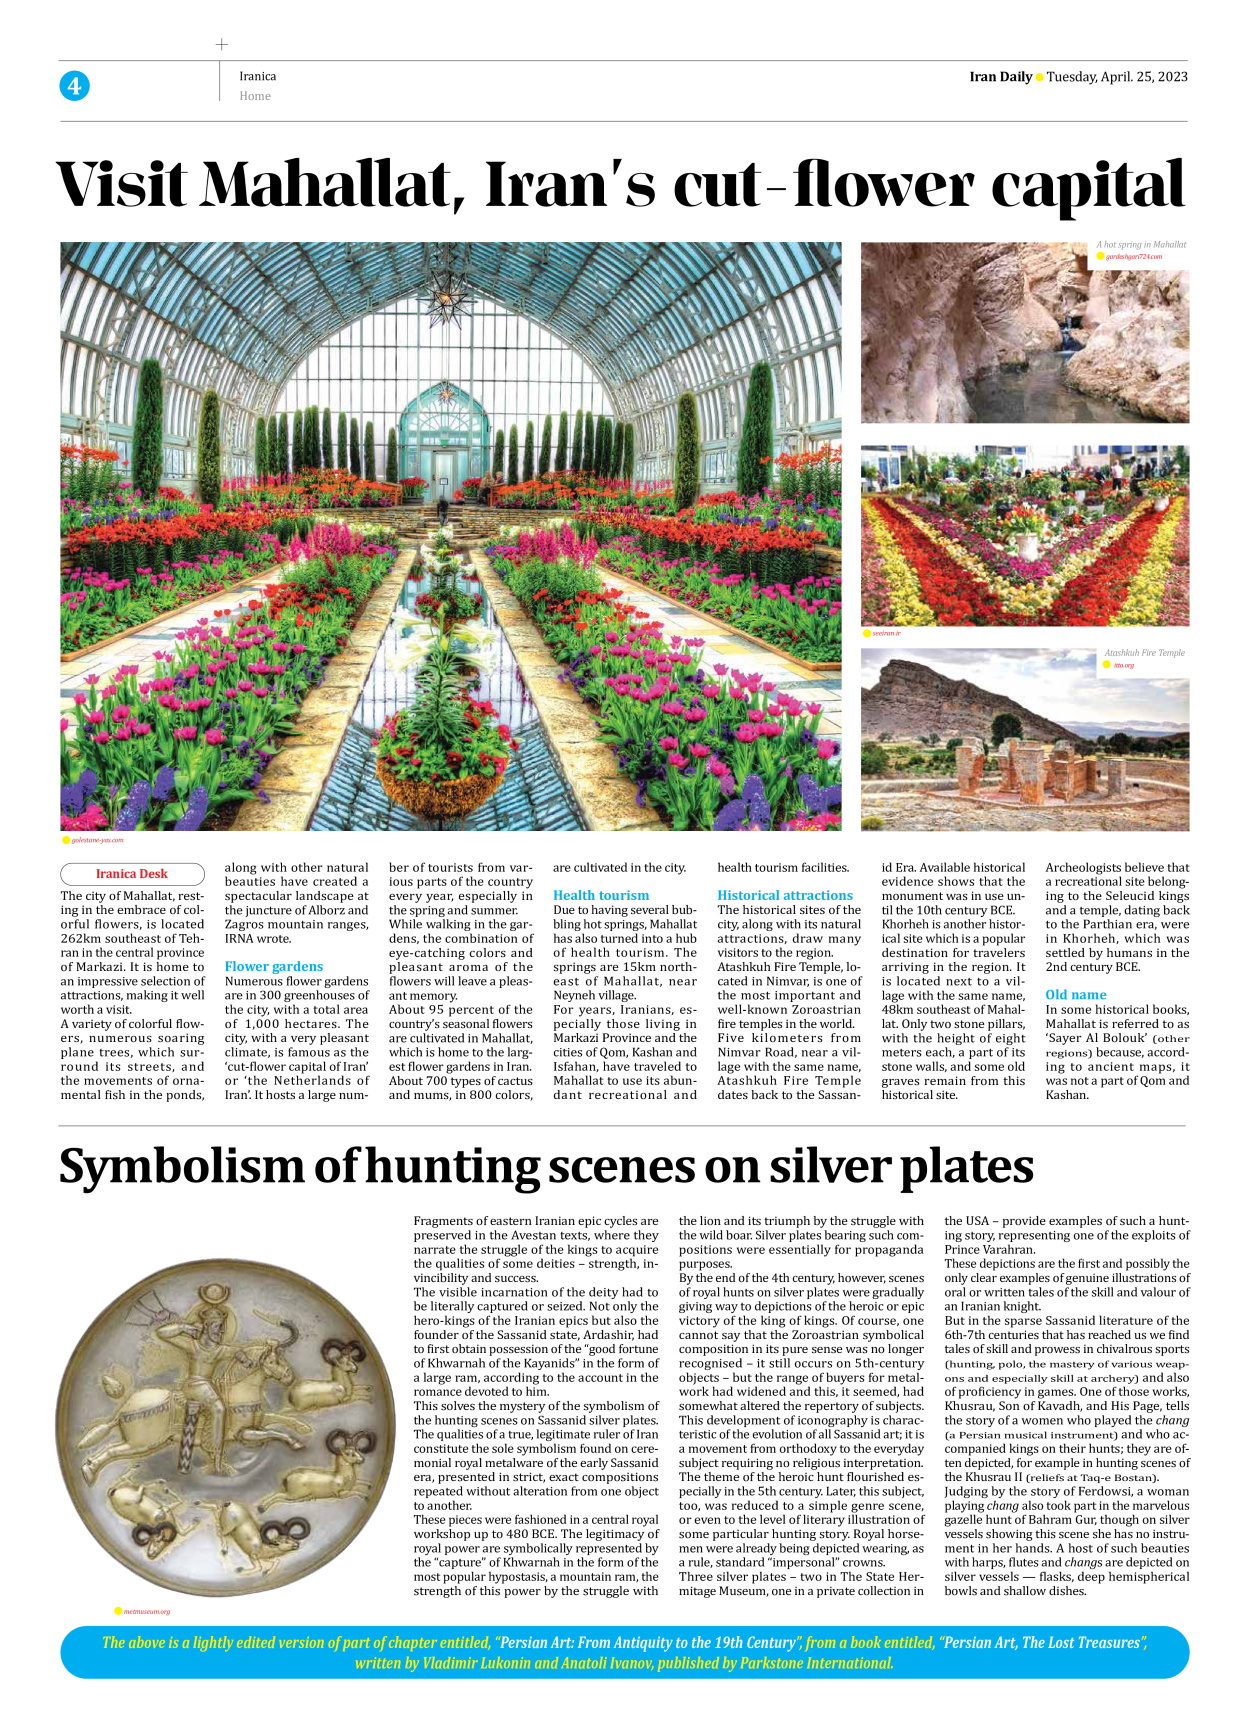 Iran Daily - Number Seven Thousand Two Hundred and Seventy Five - 25 April 2023 - Page 4